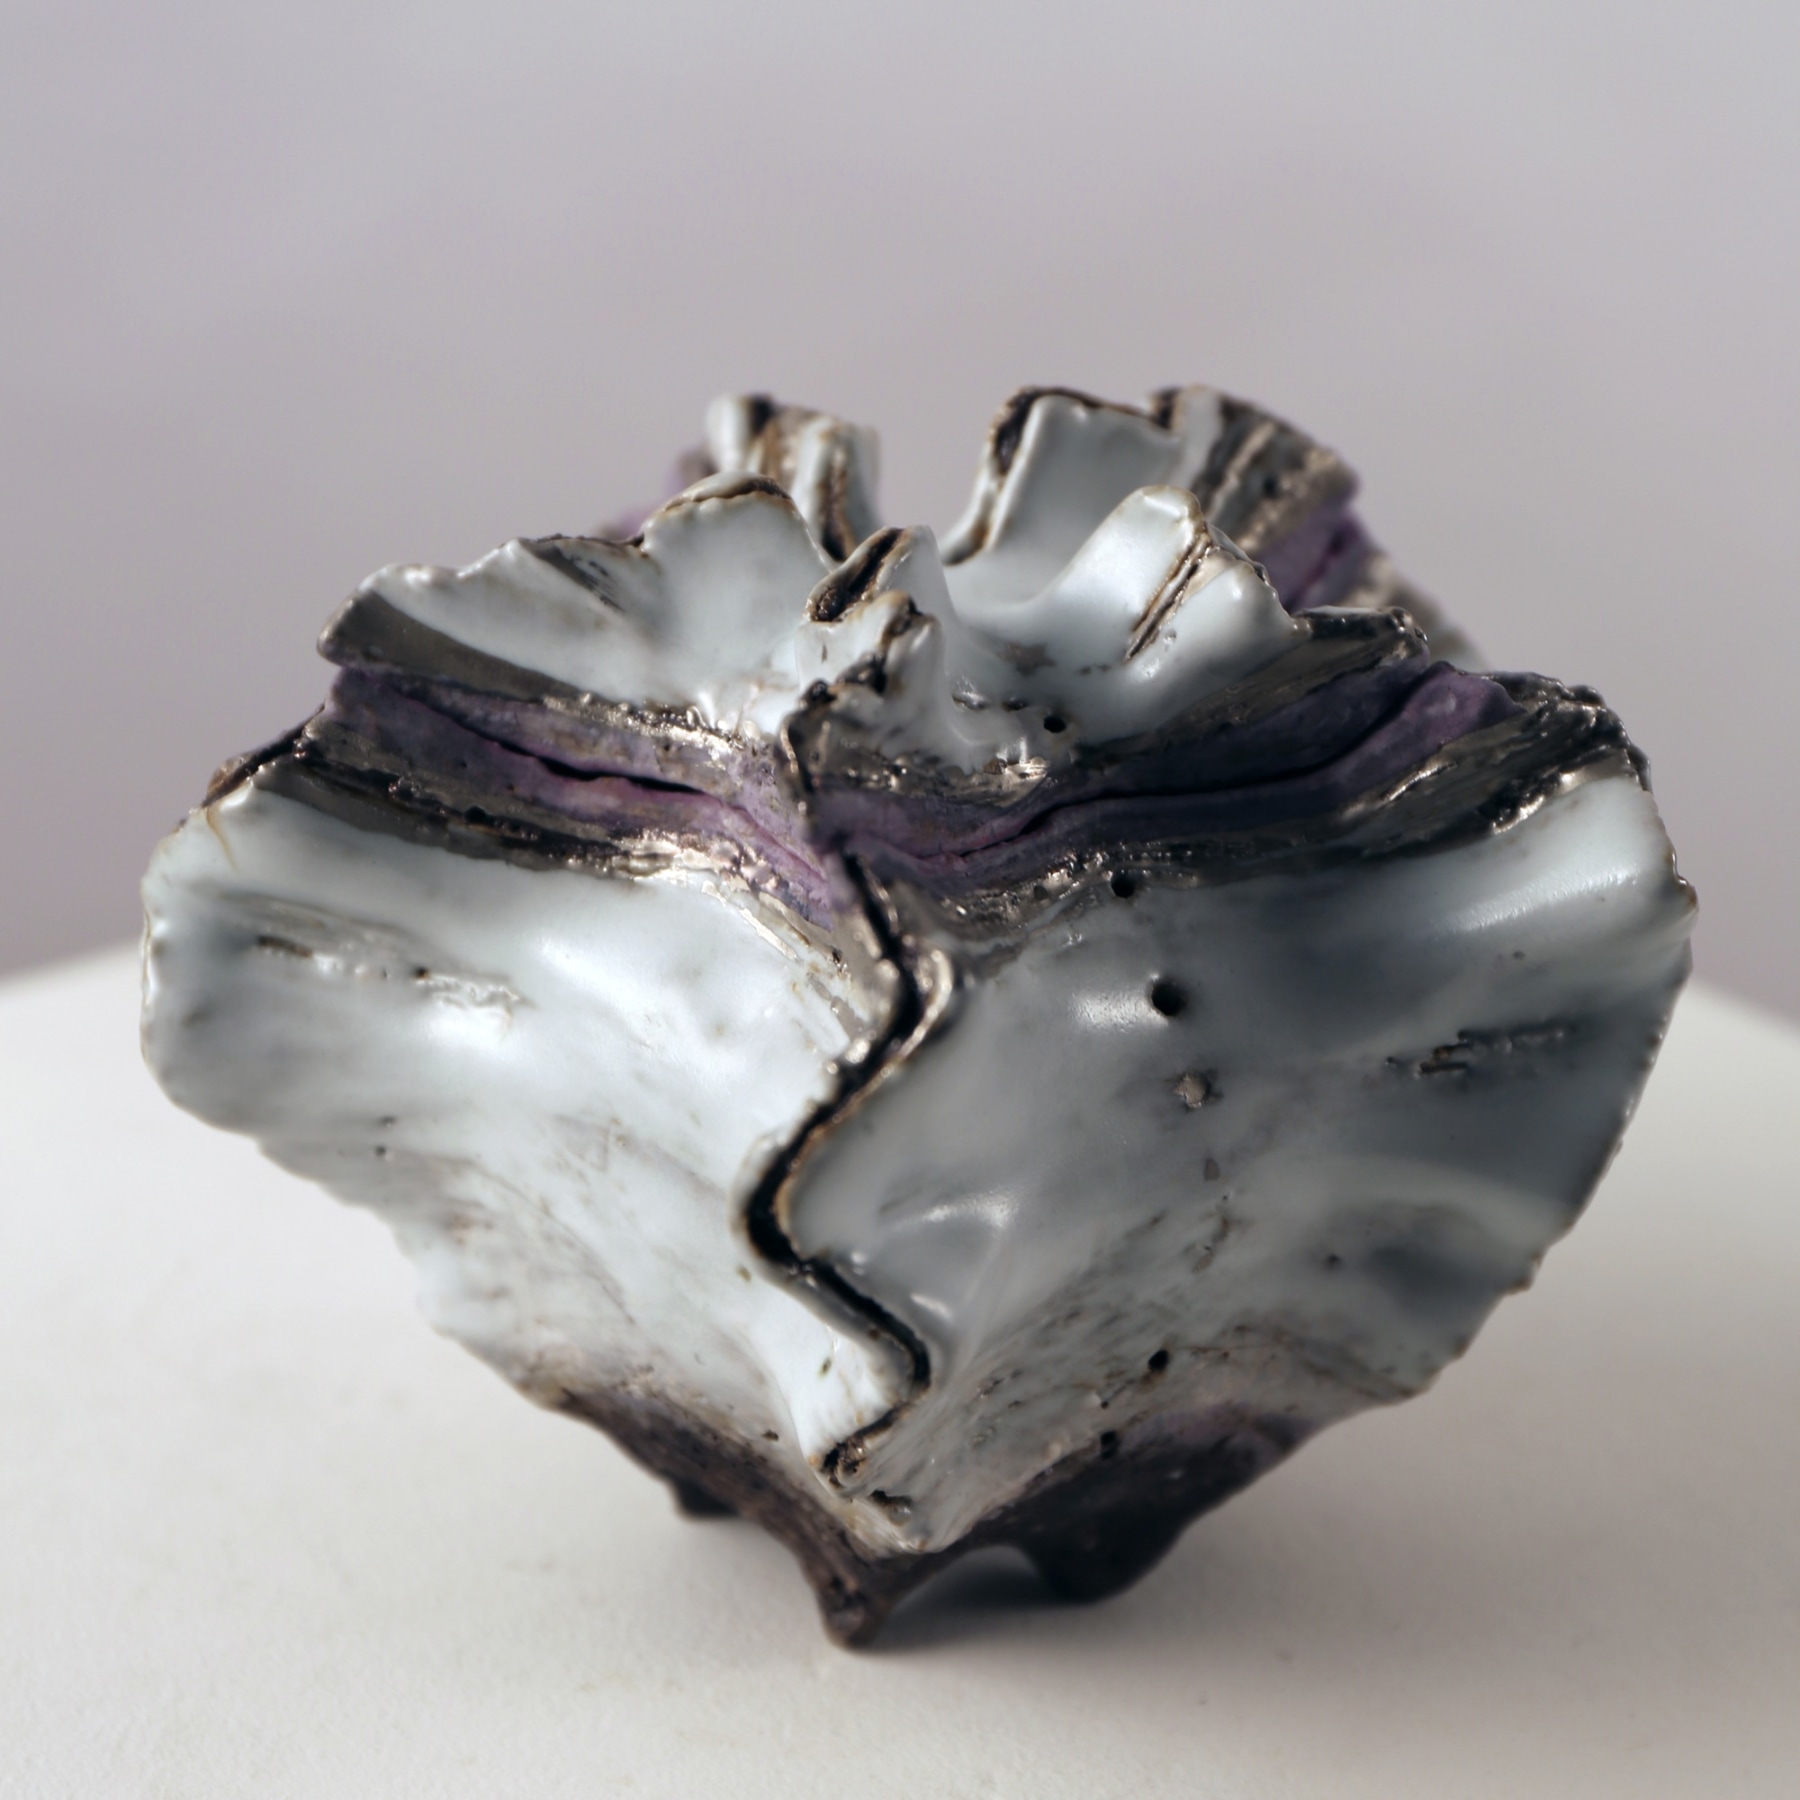 Small, covered shell-shaped container with purple and silver glazes along the mouth, 2013